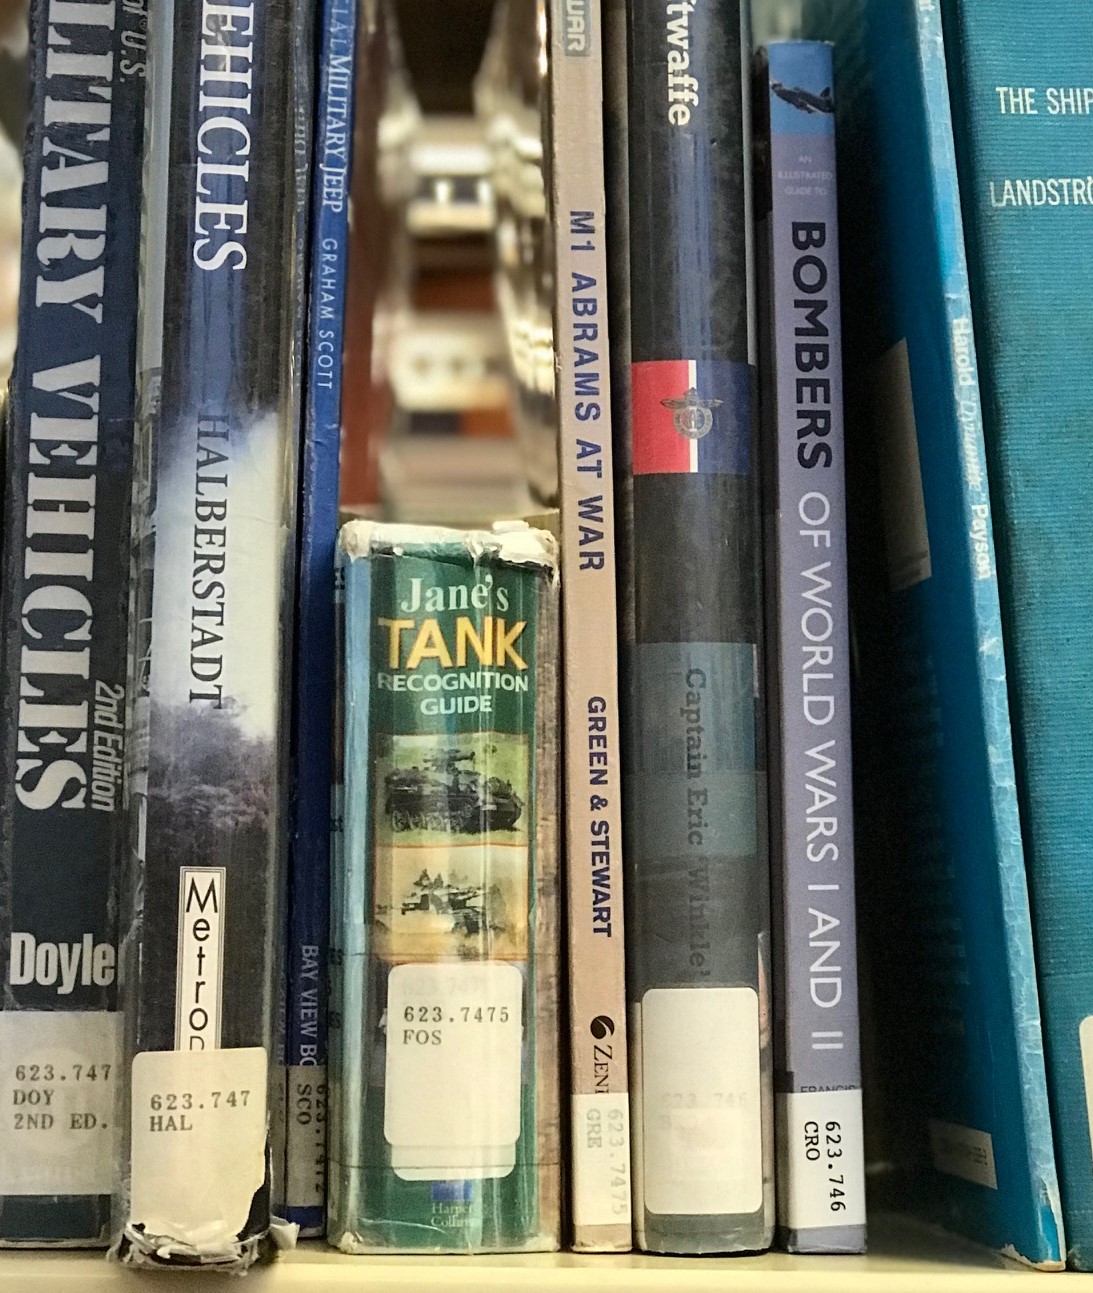 Jane's Tank Recognition Guide sits on a shelf between much larger books